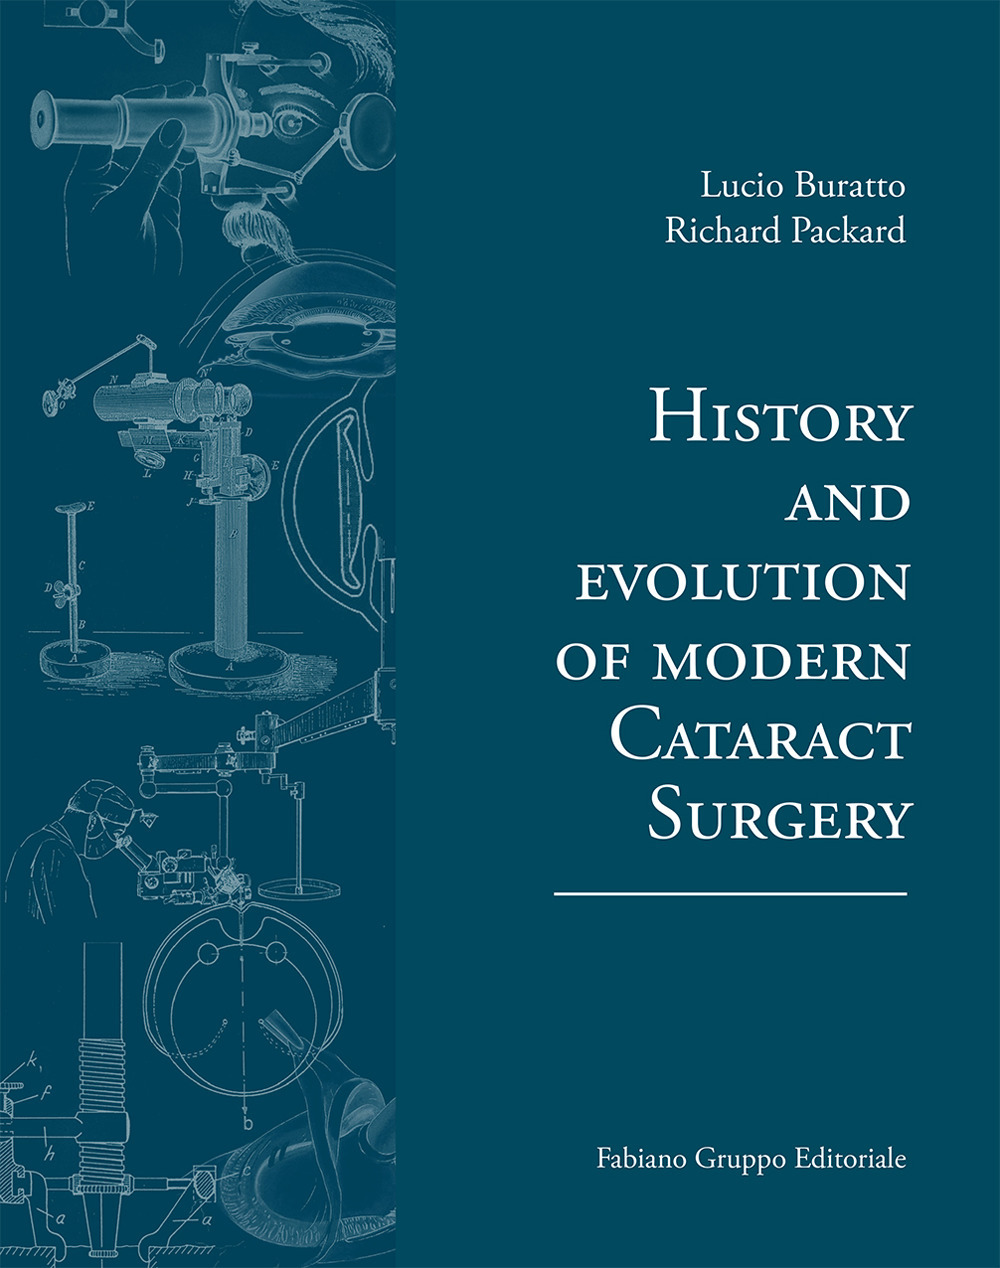 History and evolution of modern cataract surgery